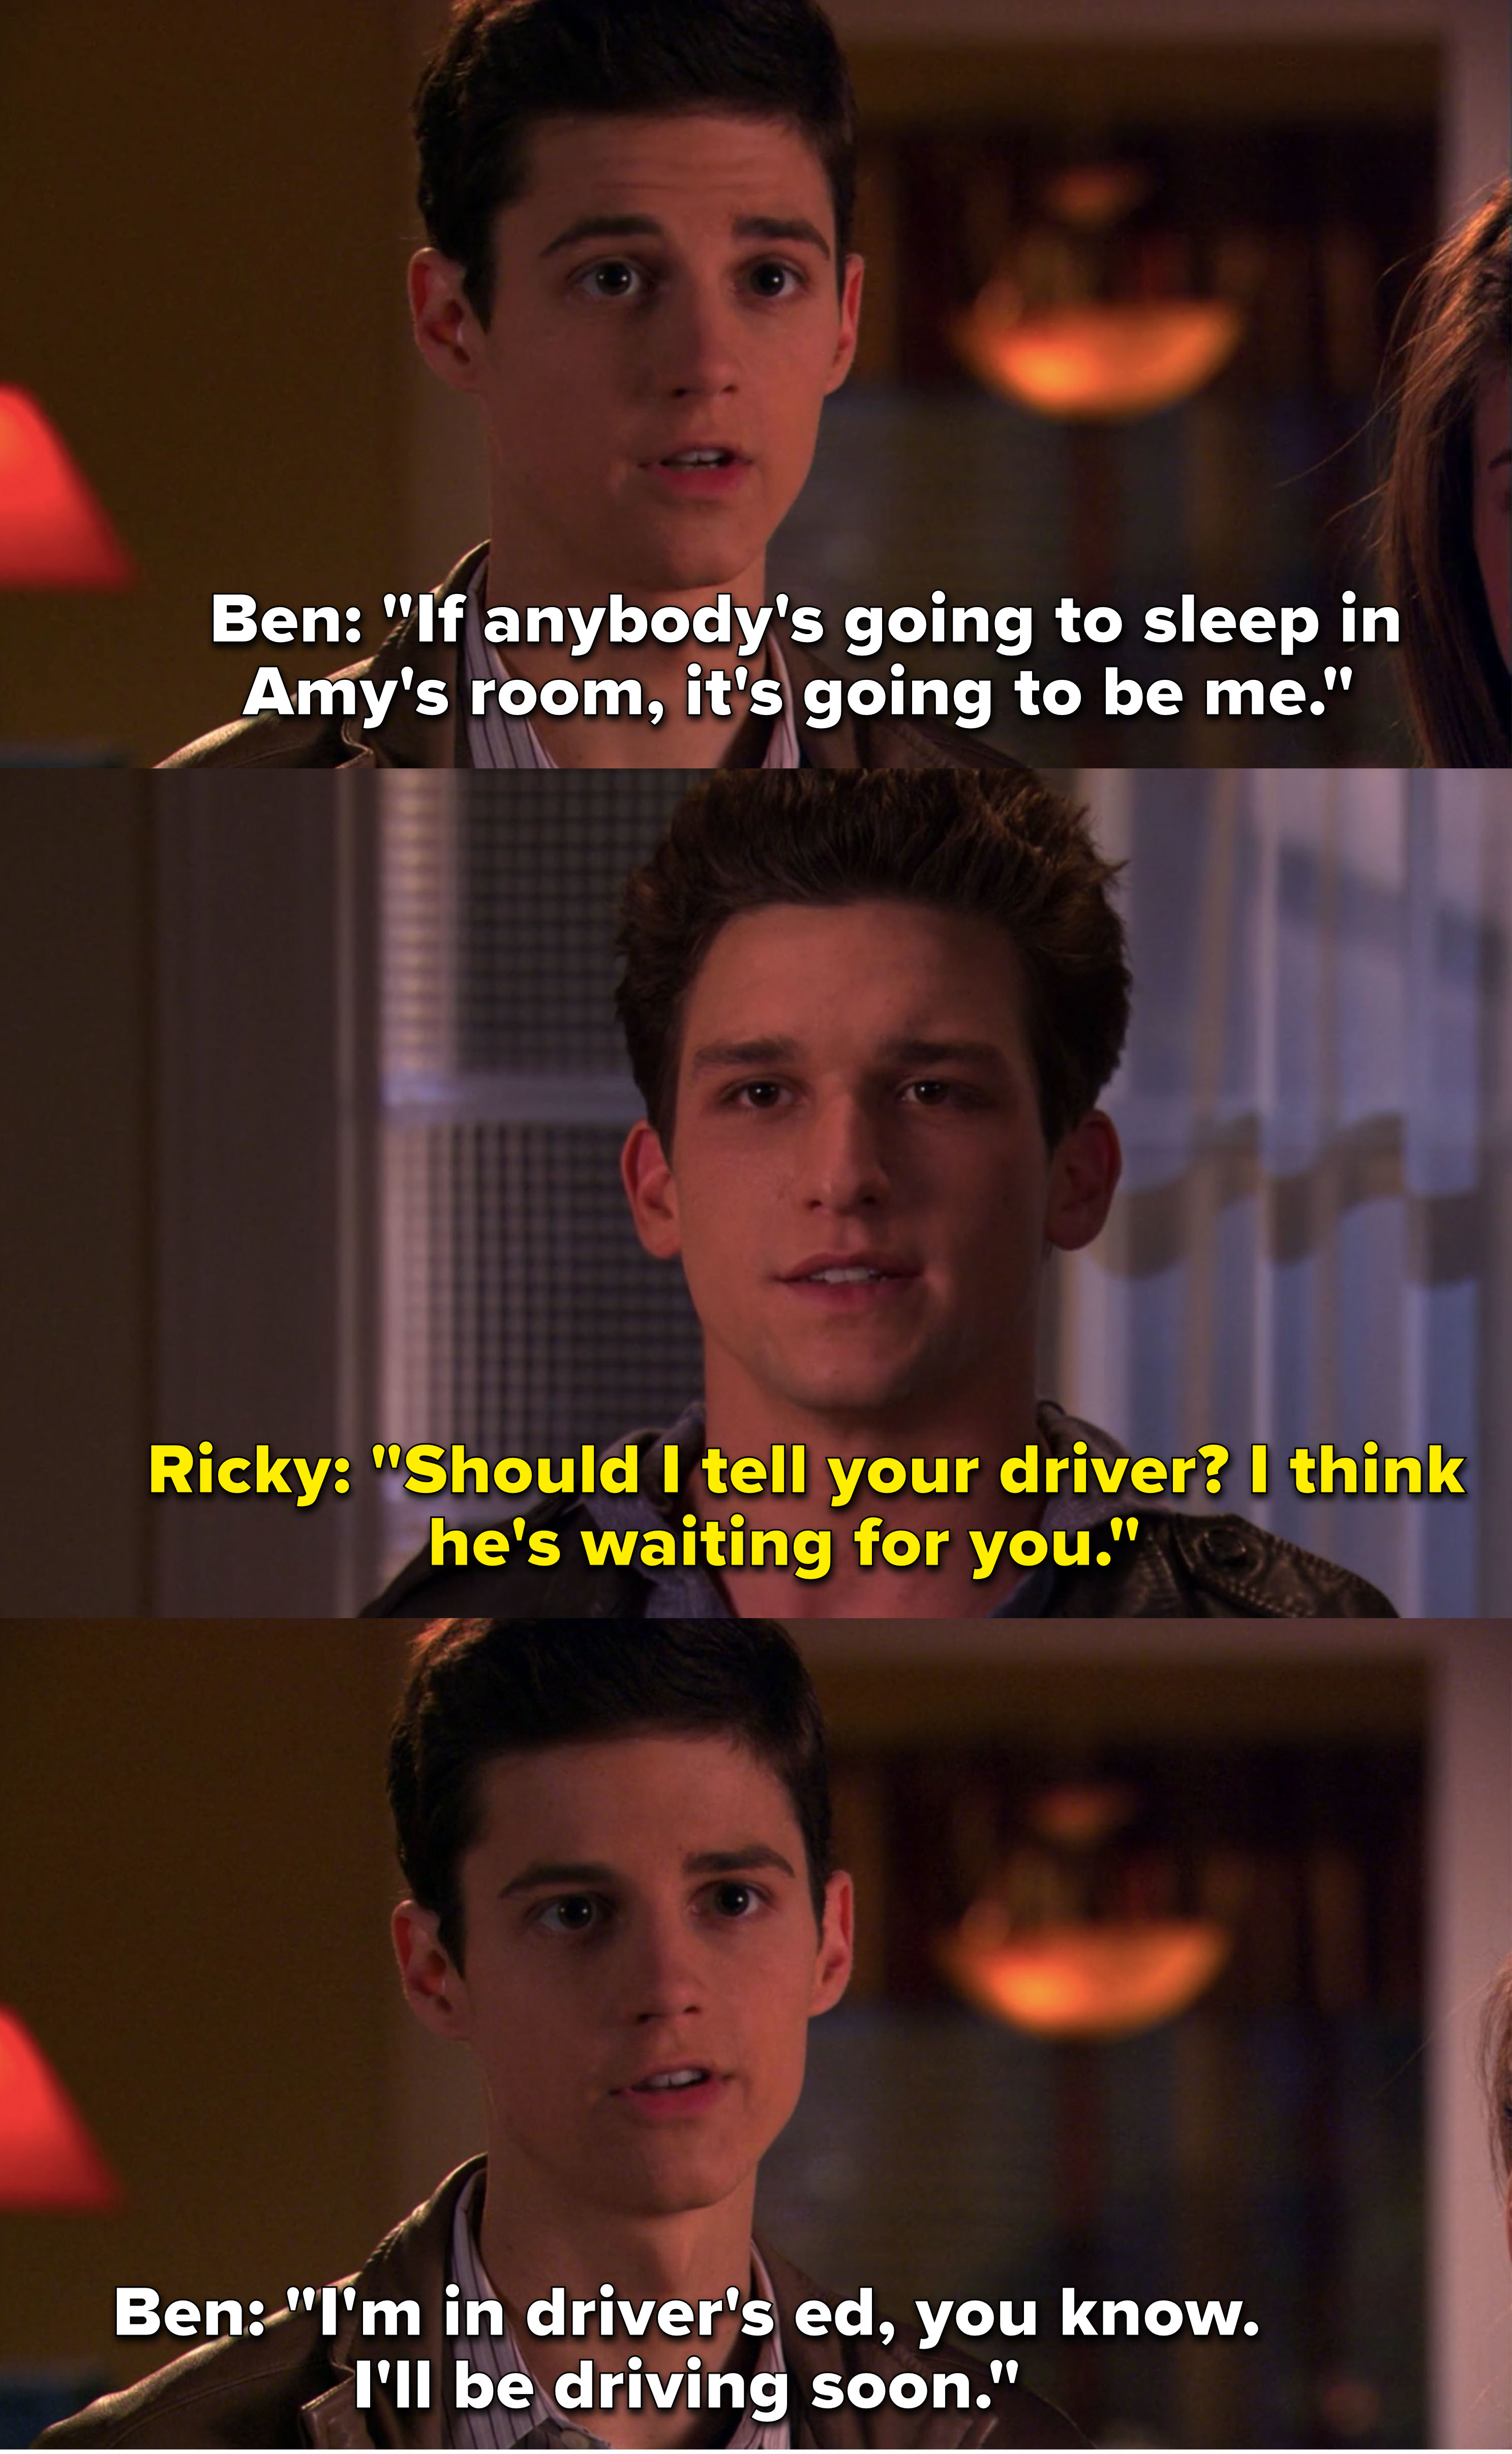 Ben tries to one-up Ricky by bragging that he&#x27;s in driver&#x27;s ed